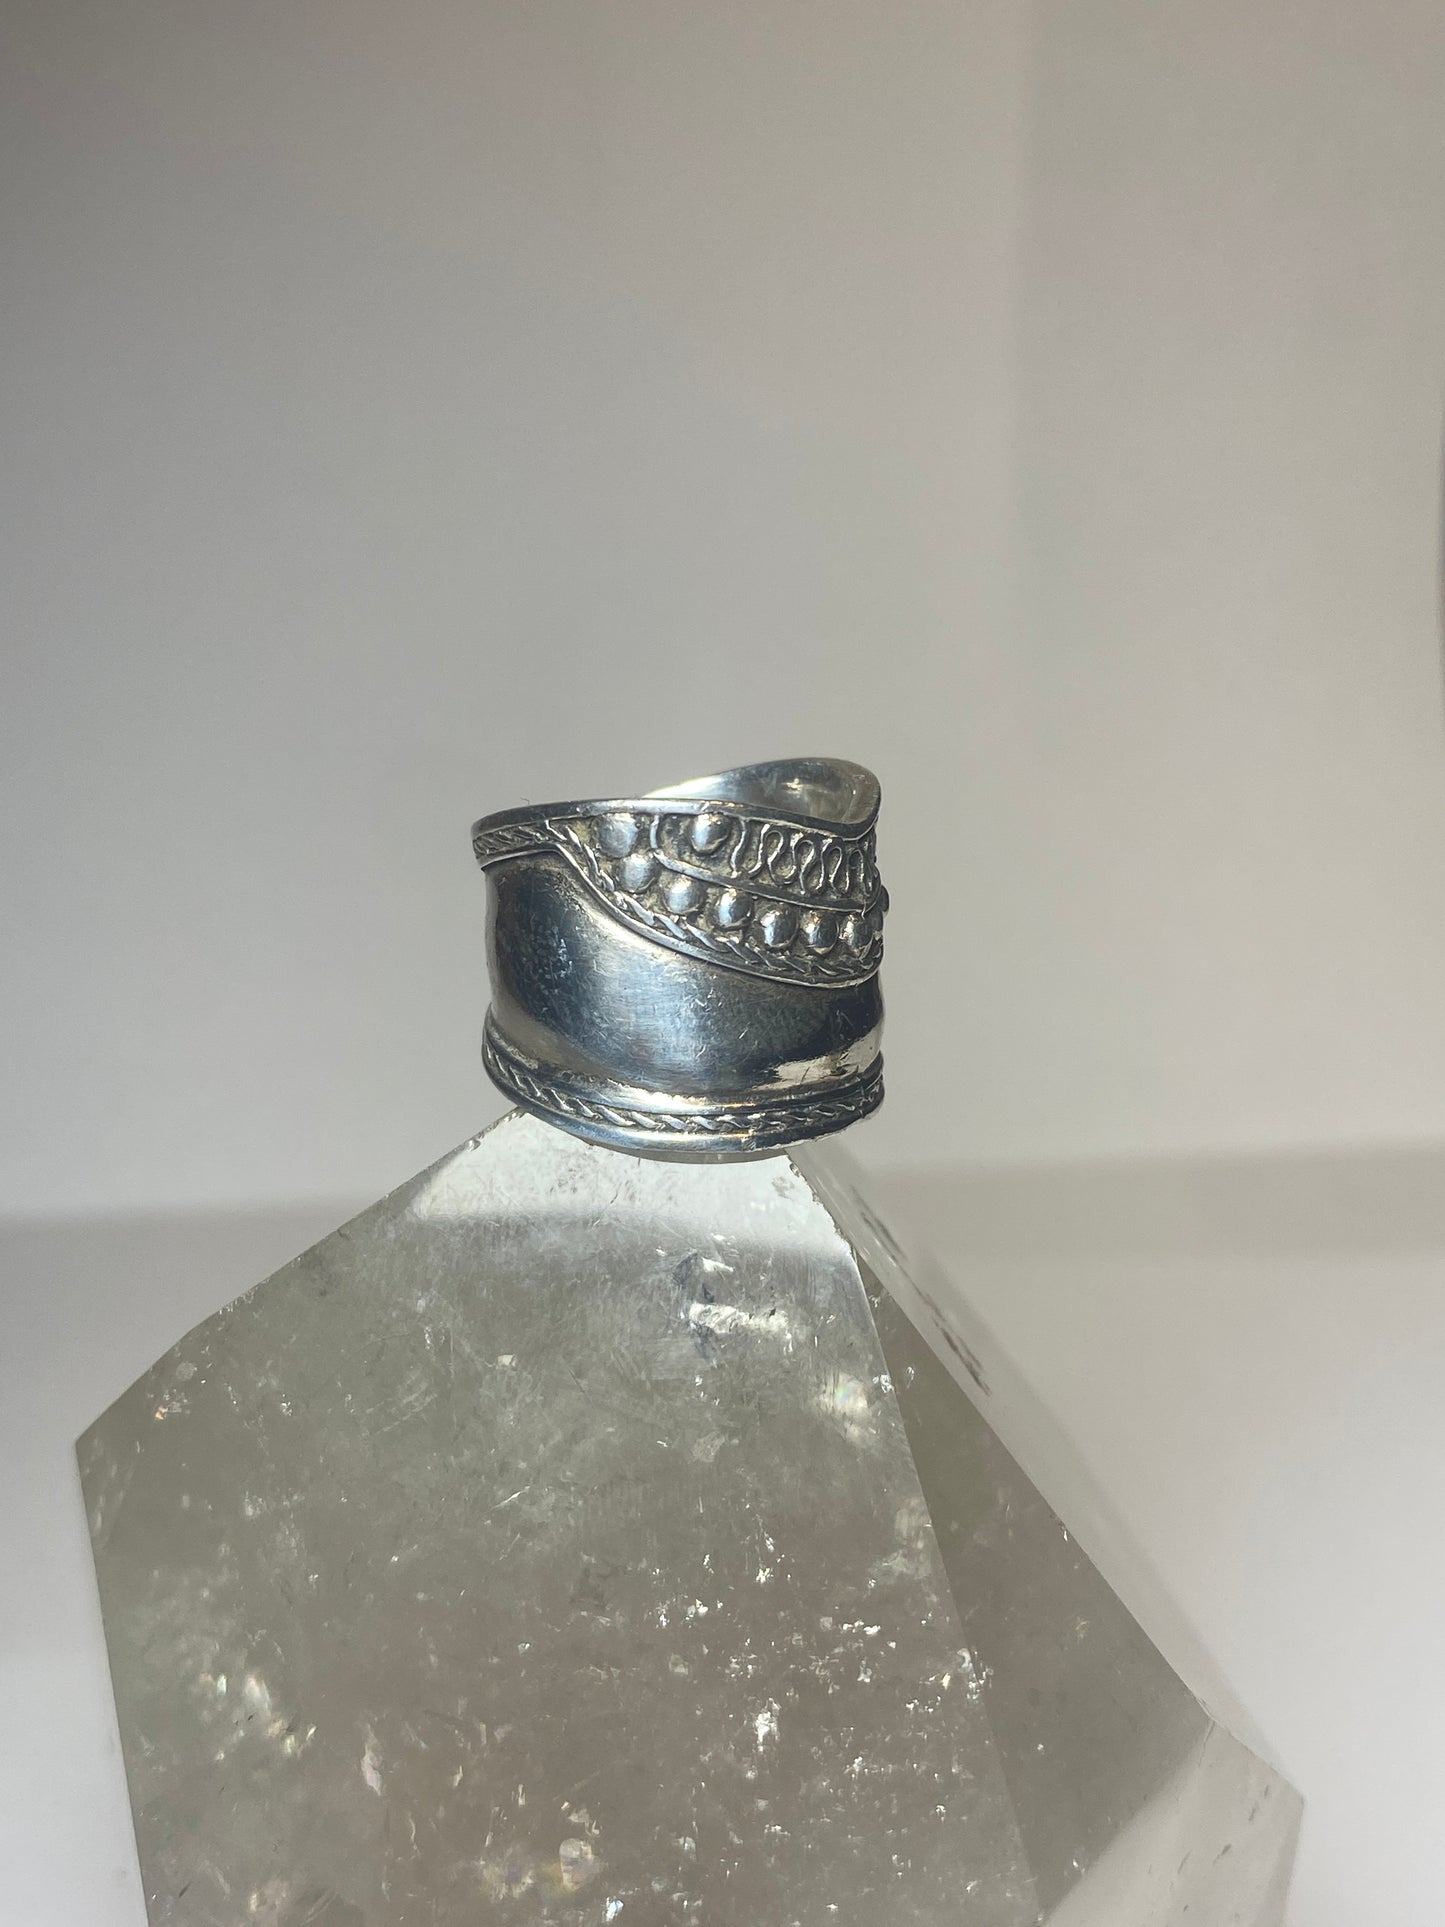 Cigar ring size 5.50 rope  band sterling silver women girls